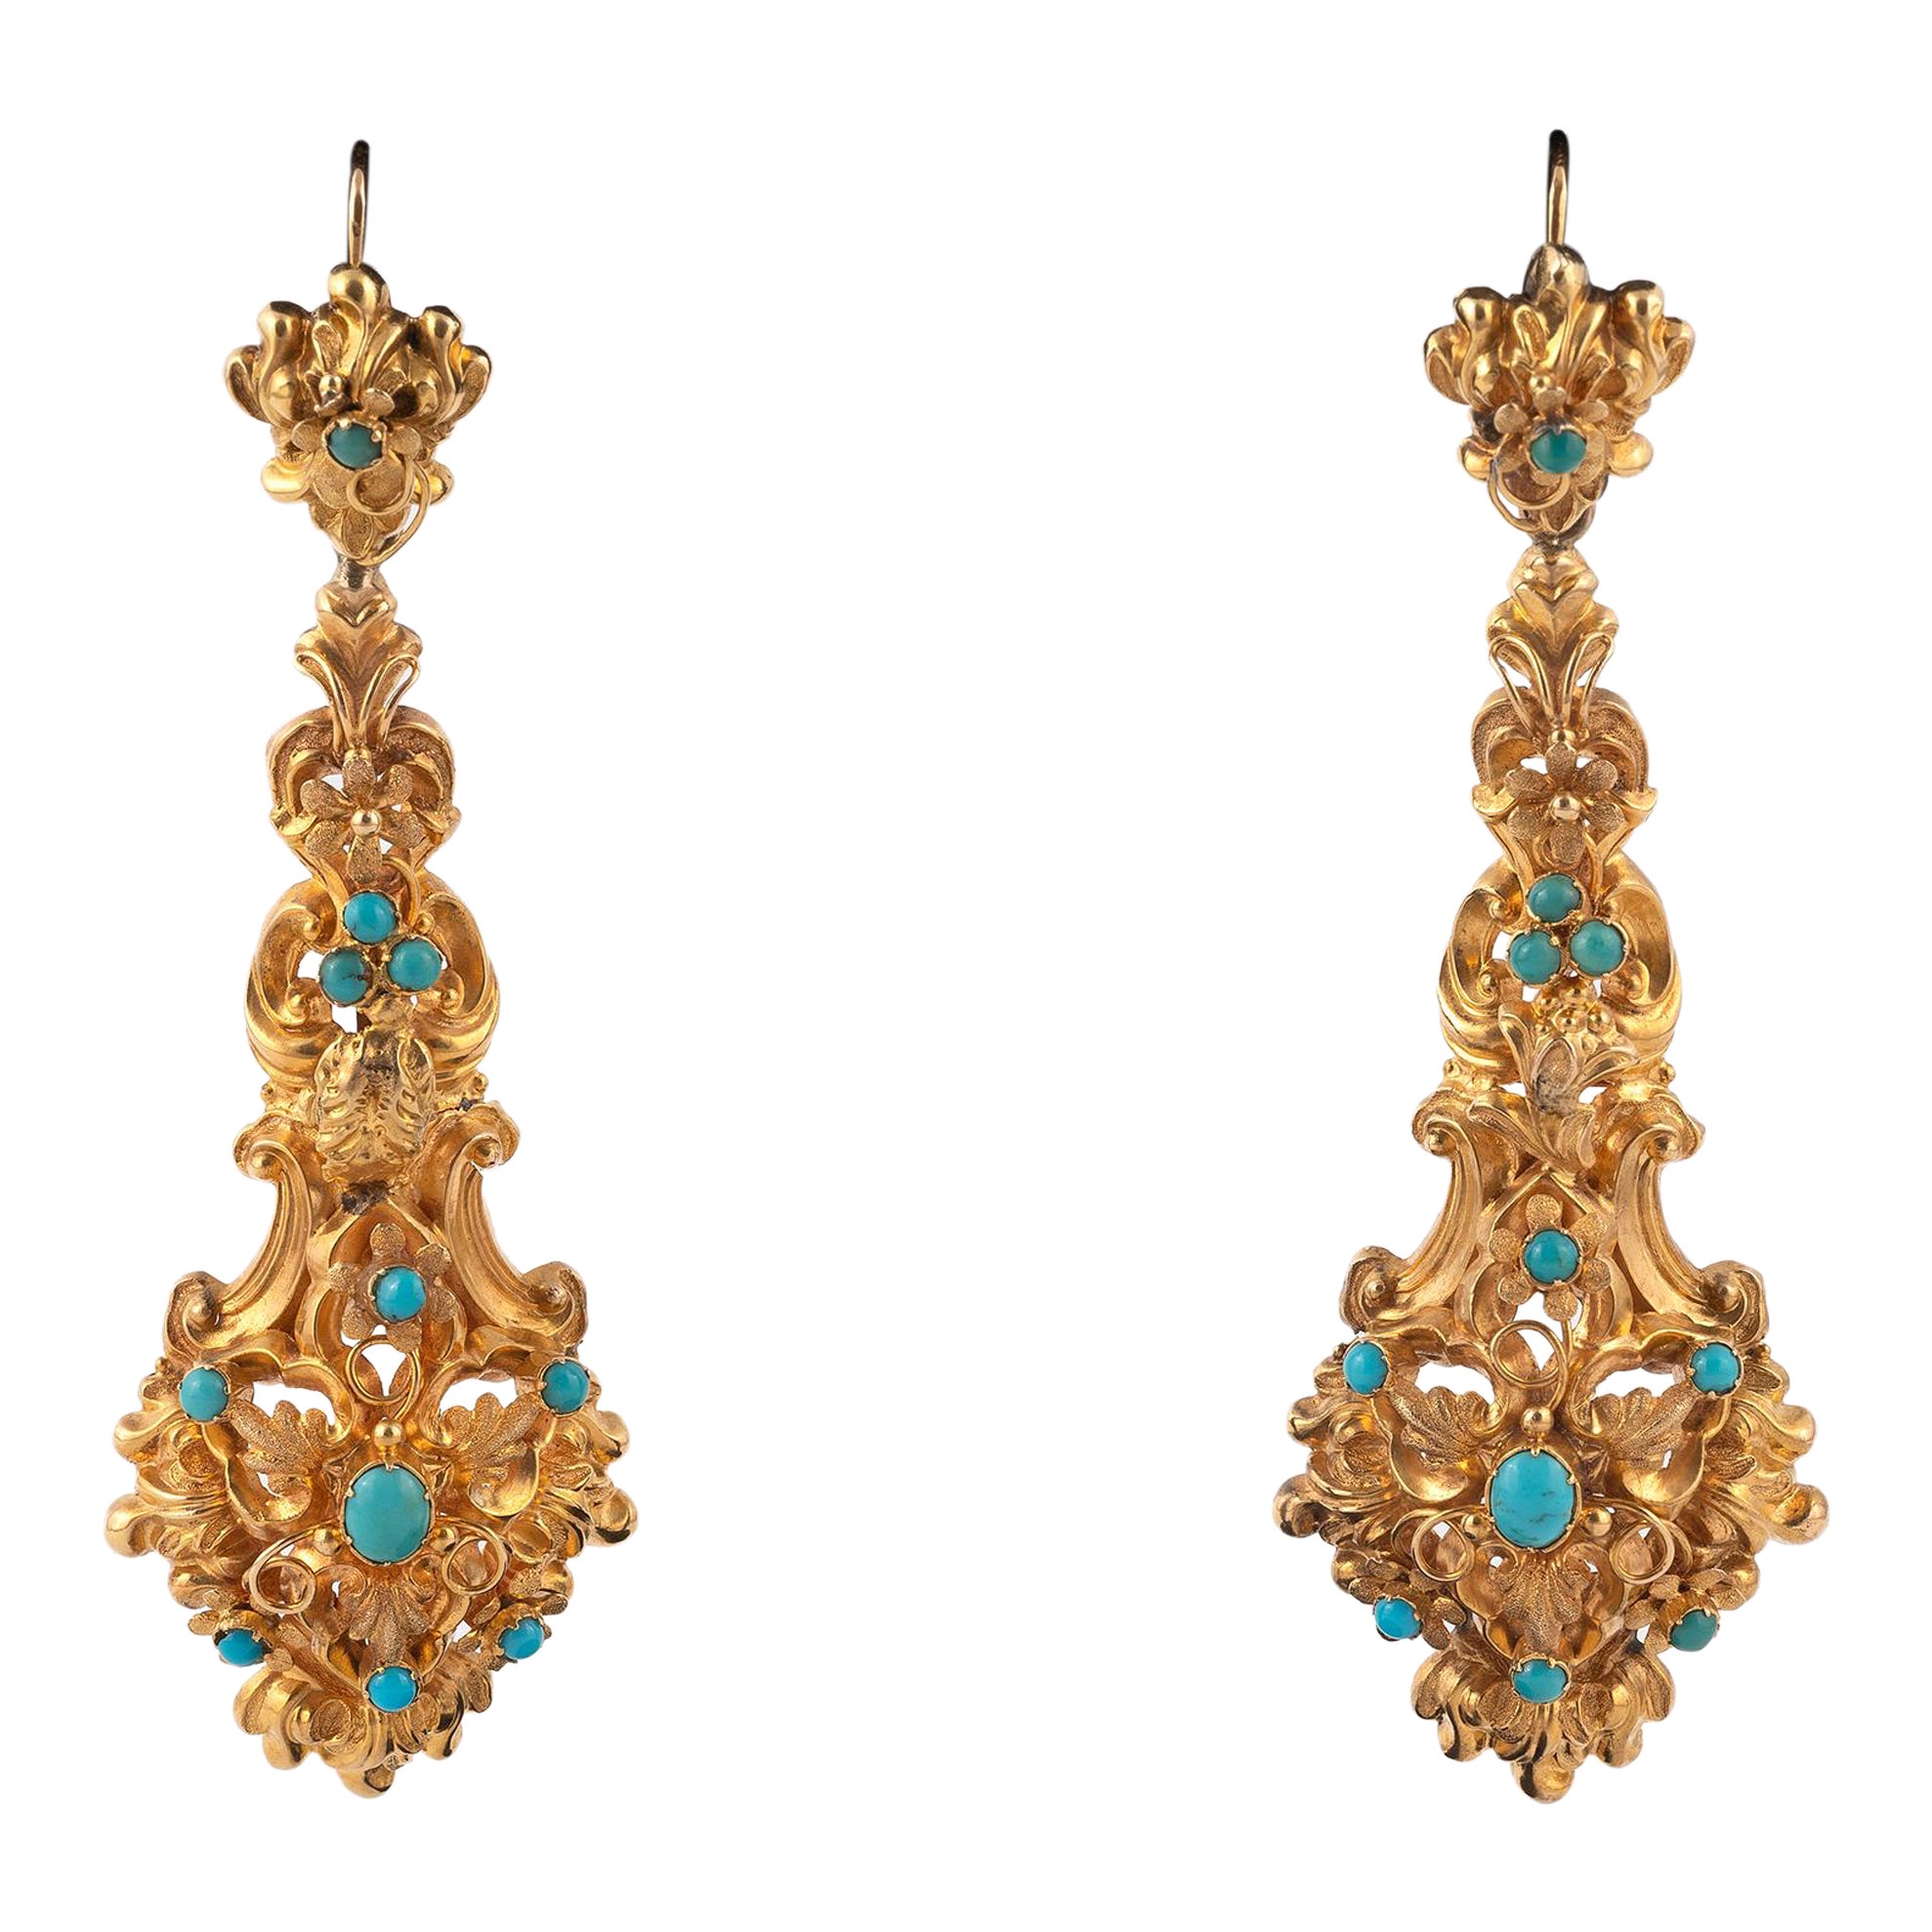 Pair of Georgian Turquoise and Gold Ear Pendants